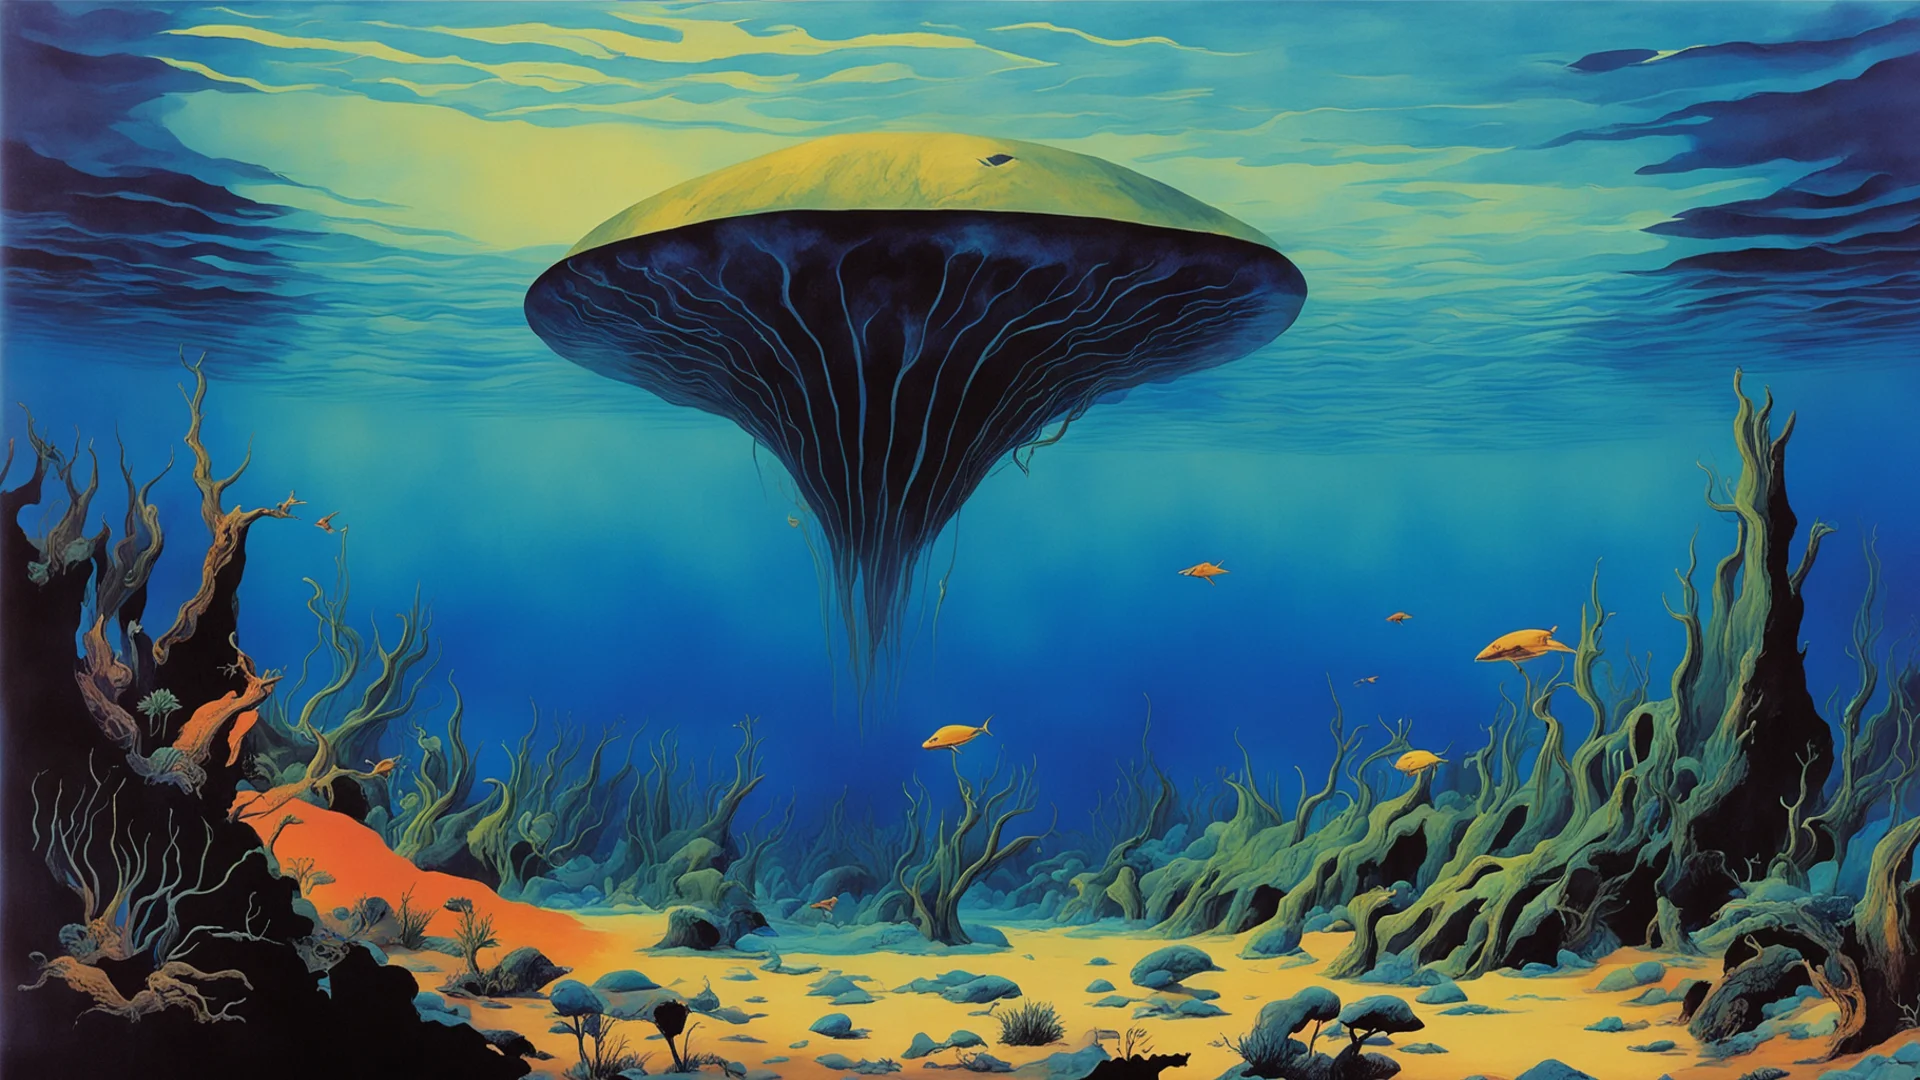 airoger dean underwater scene like yes album cover amazing awesome portrait 2 wide